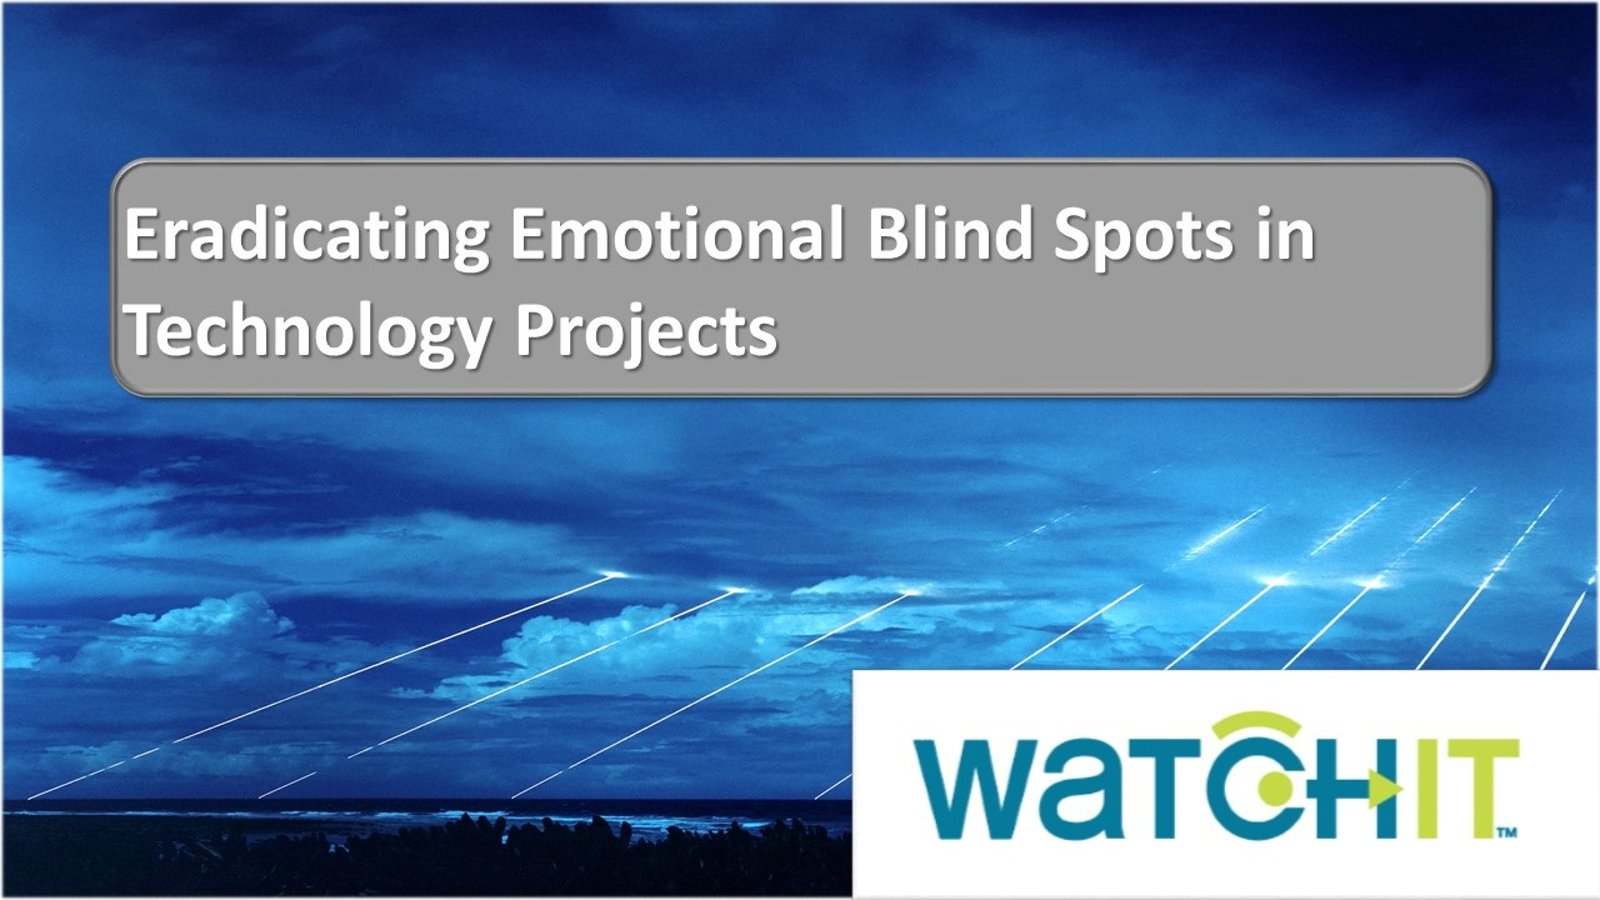 Eradicating Emotional Blind Spots in Technology Projects - Personal Barriers in Technology